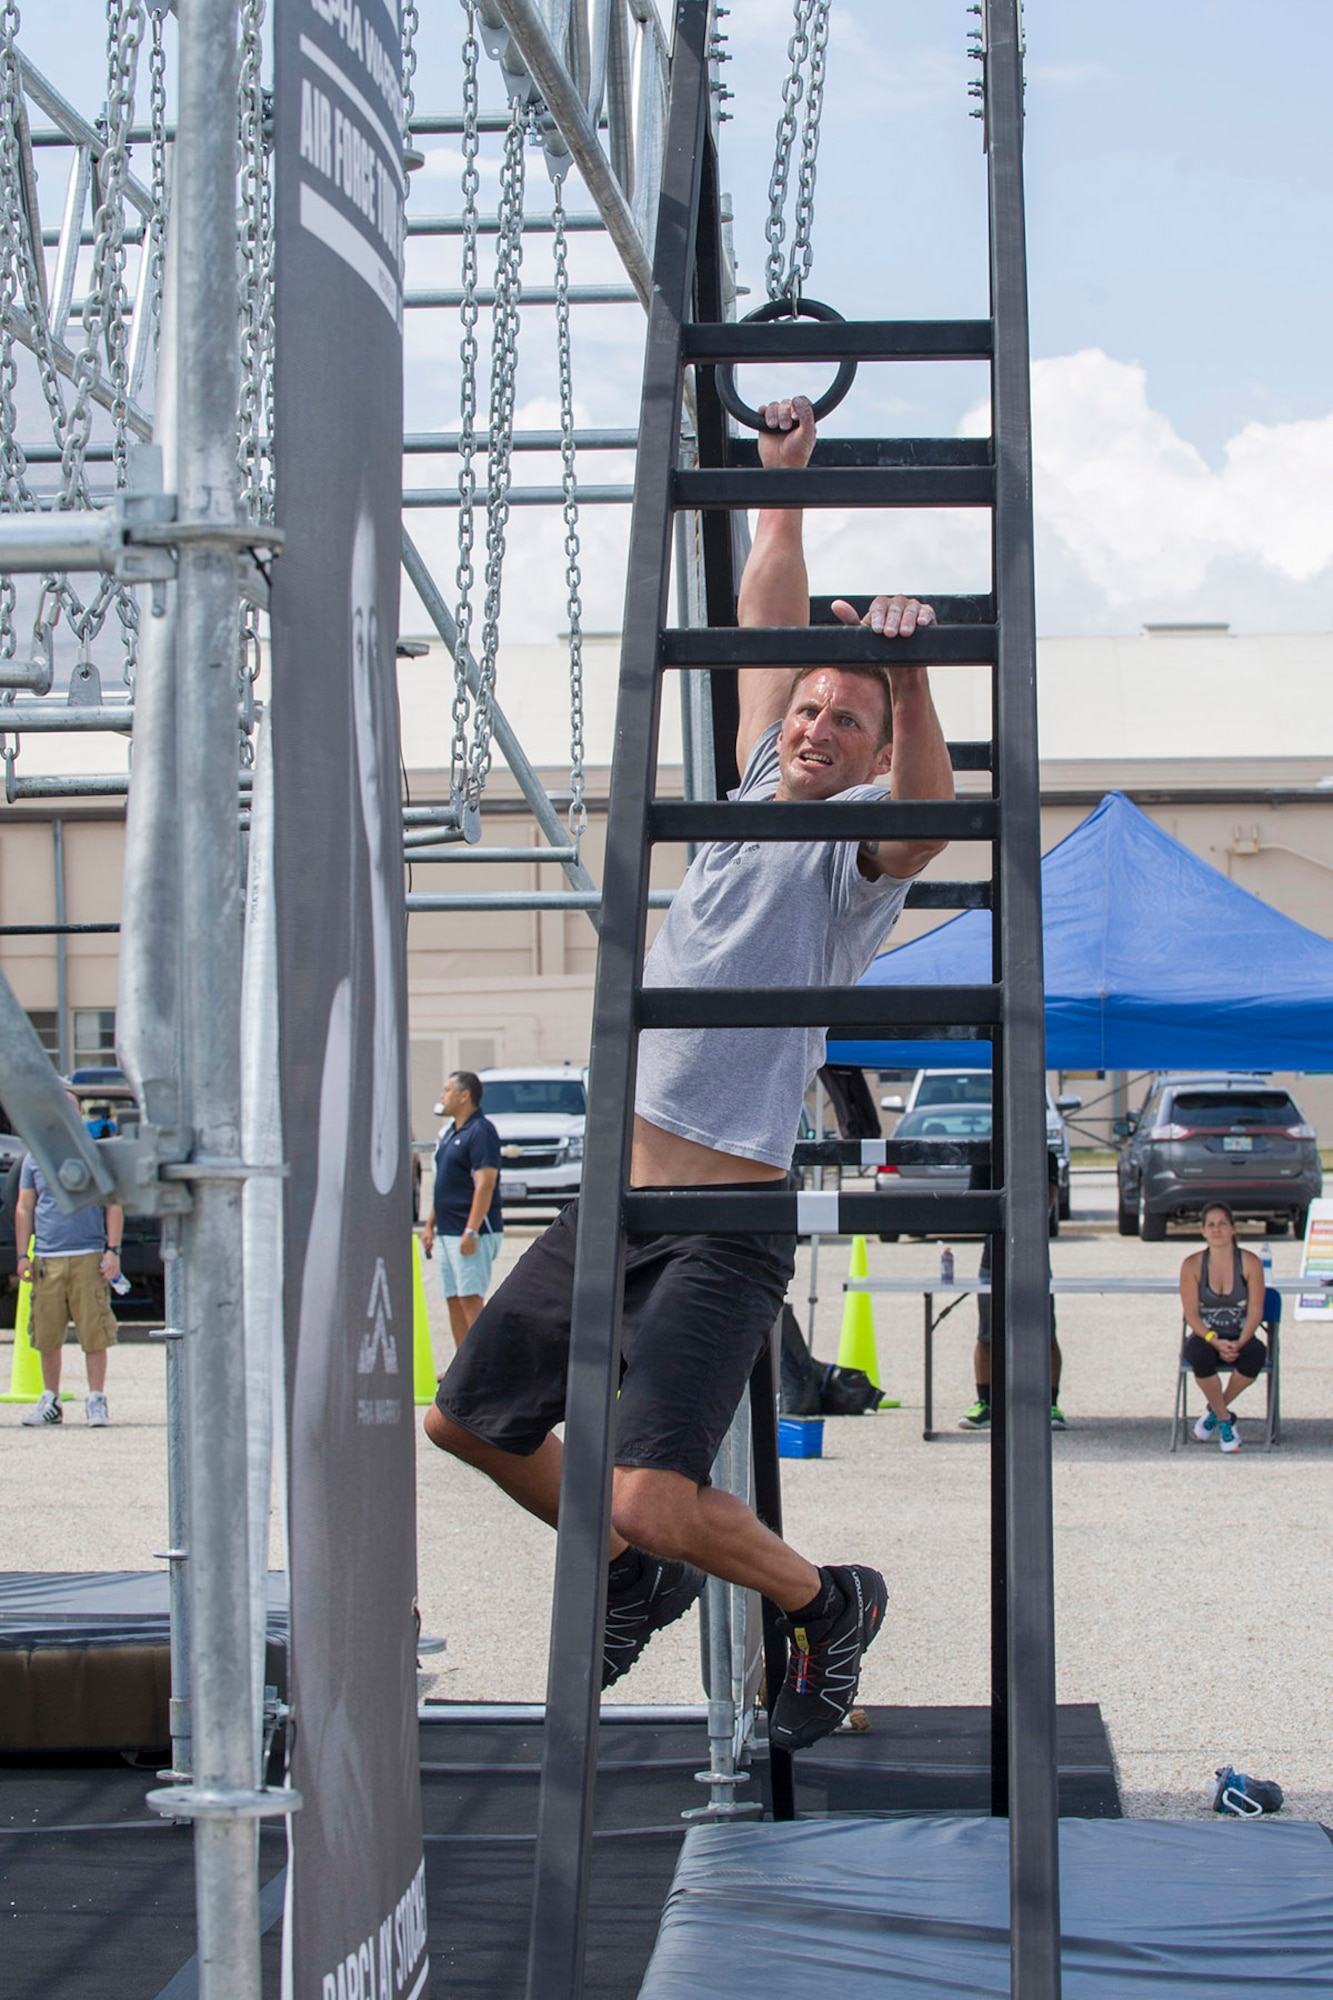 Tech. Sgt. Kyle Minshew, 308th Rescue Squadron pararescueman, puts his upper body strength to the test as he works his way through the Alpha Warrior Course April 22, 2017 set up at Patrick Air Force Base, Florida. Minshew placed second in the competition out of 37 competitors. (U.S. Air Force photo/Phillip Sunkel)